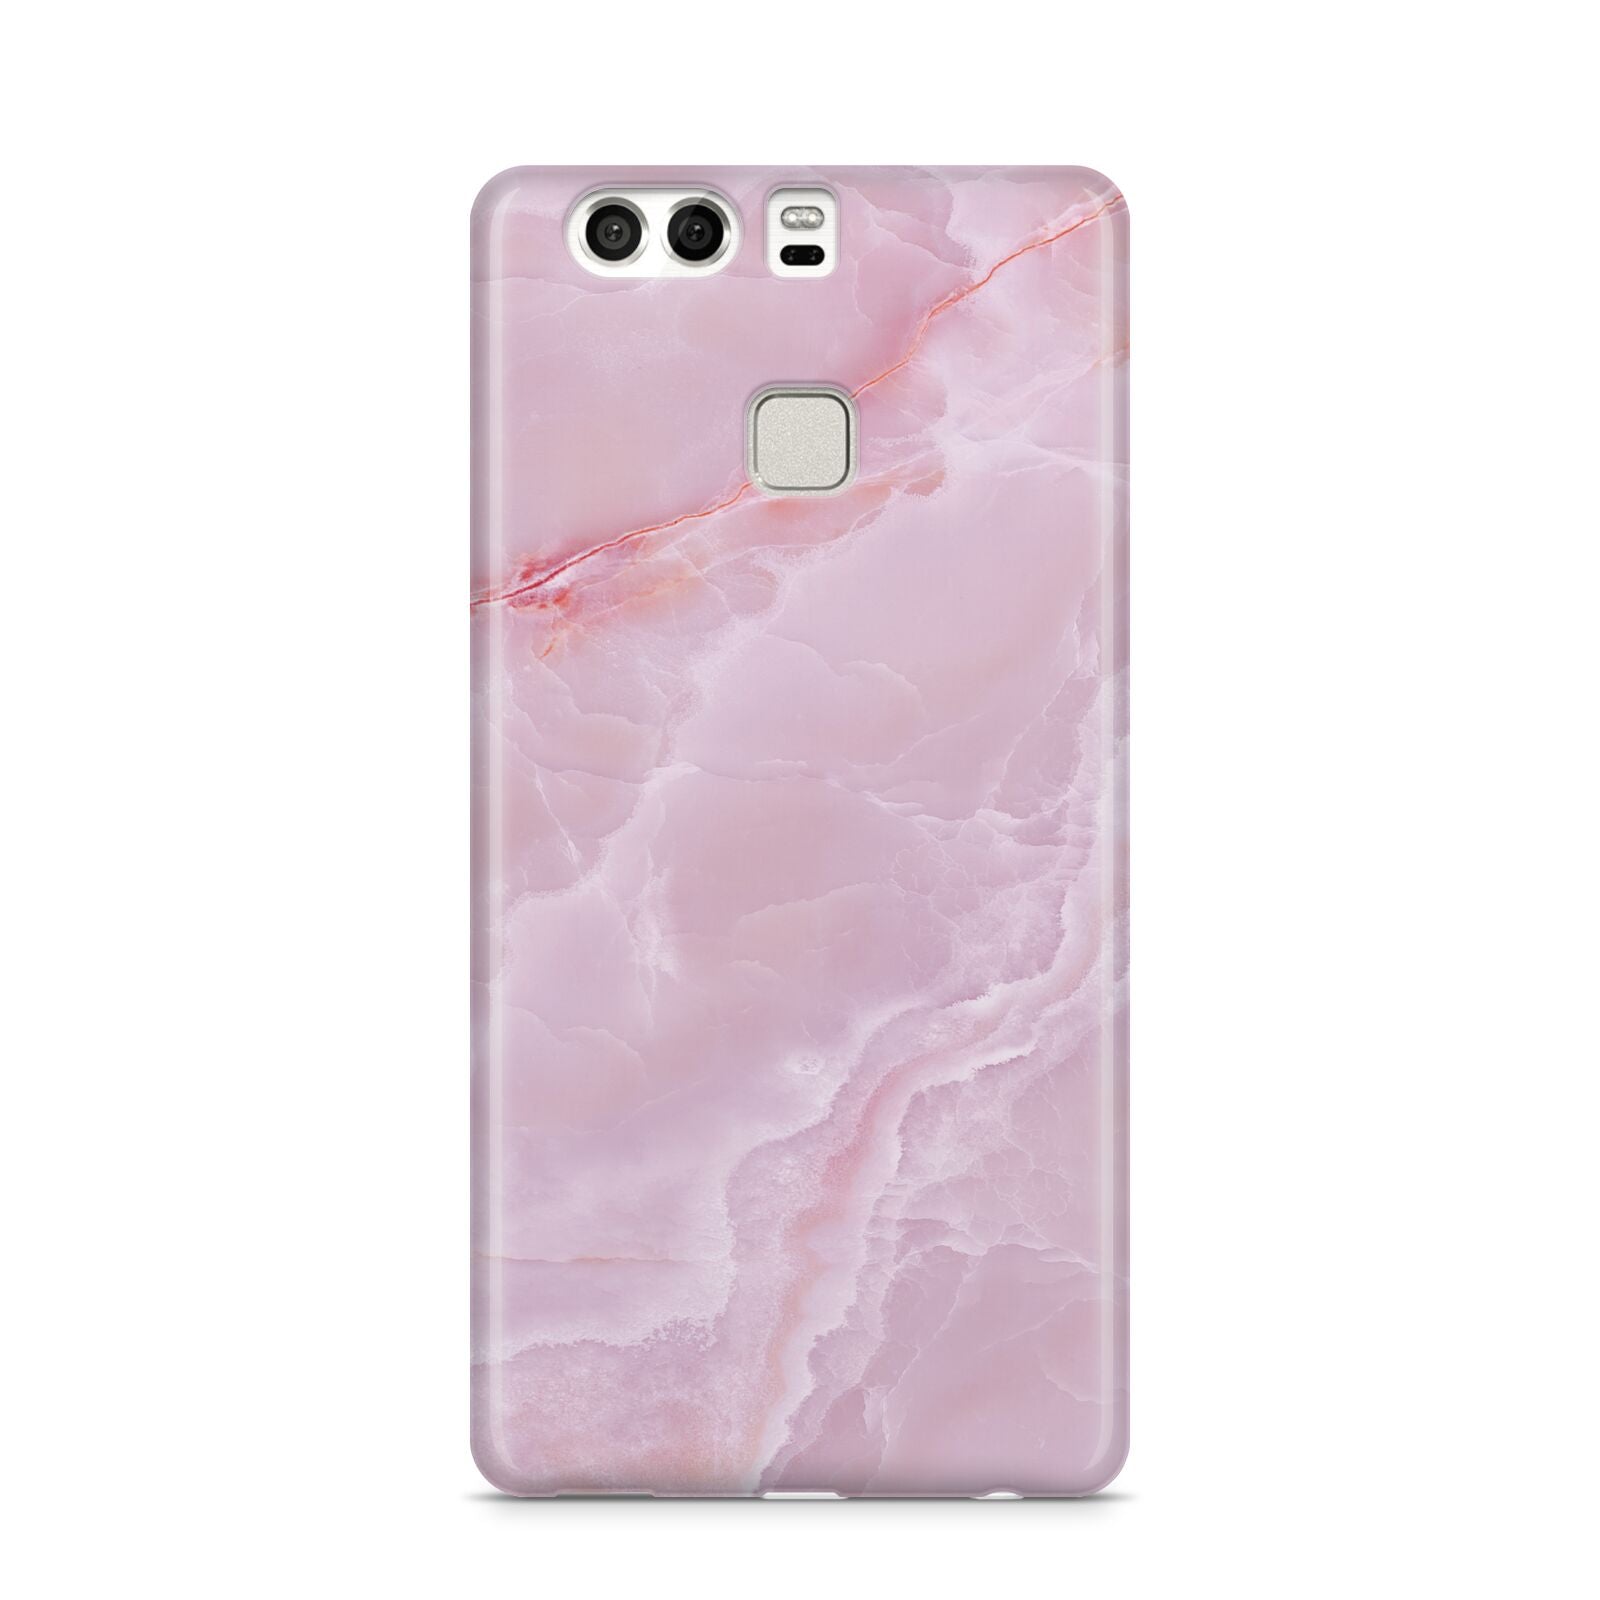 Dreamy Pink Marble Huawei P9 Case